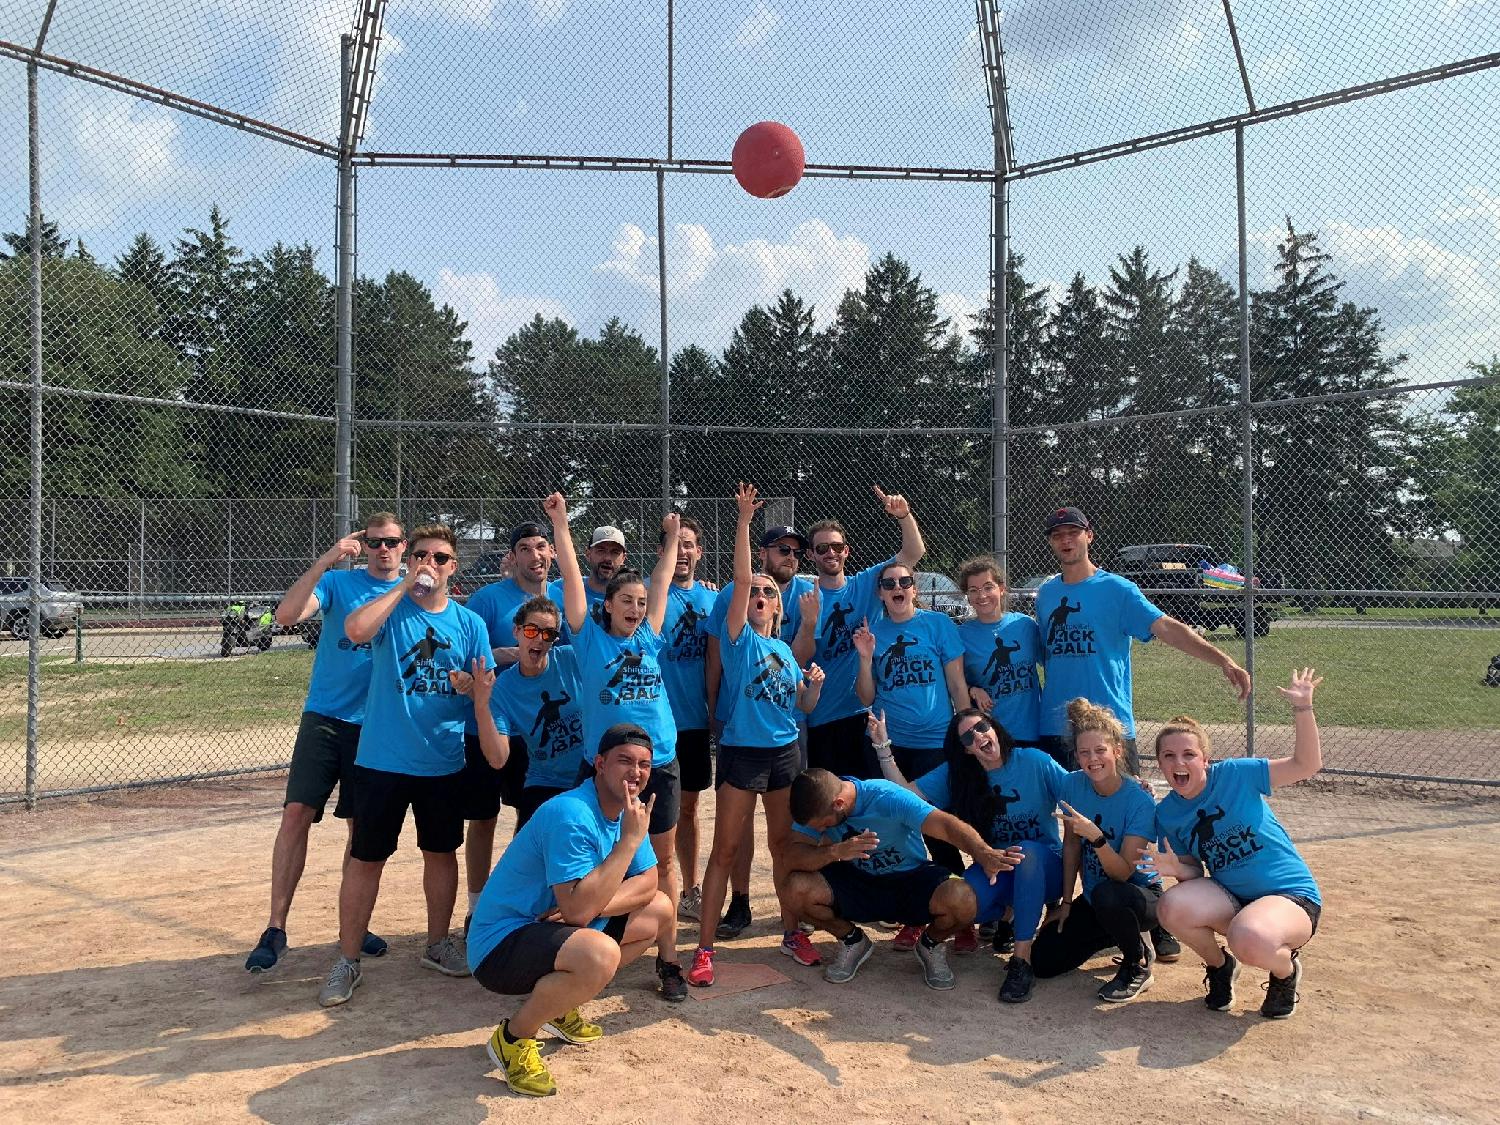 The Annual Kickball Tournament is a tradition that our employees take VERY seriously.